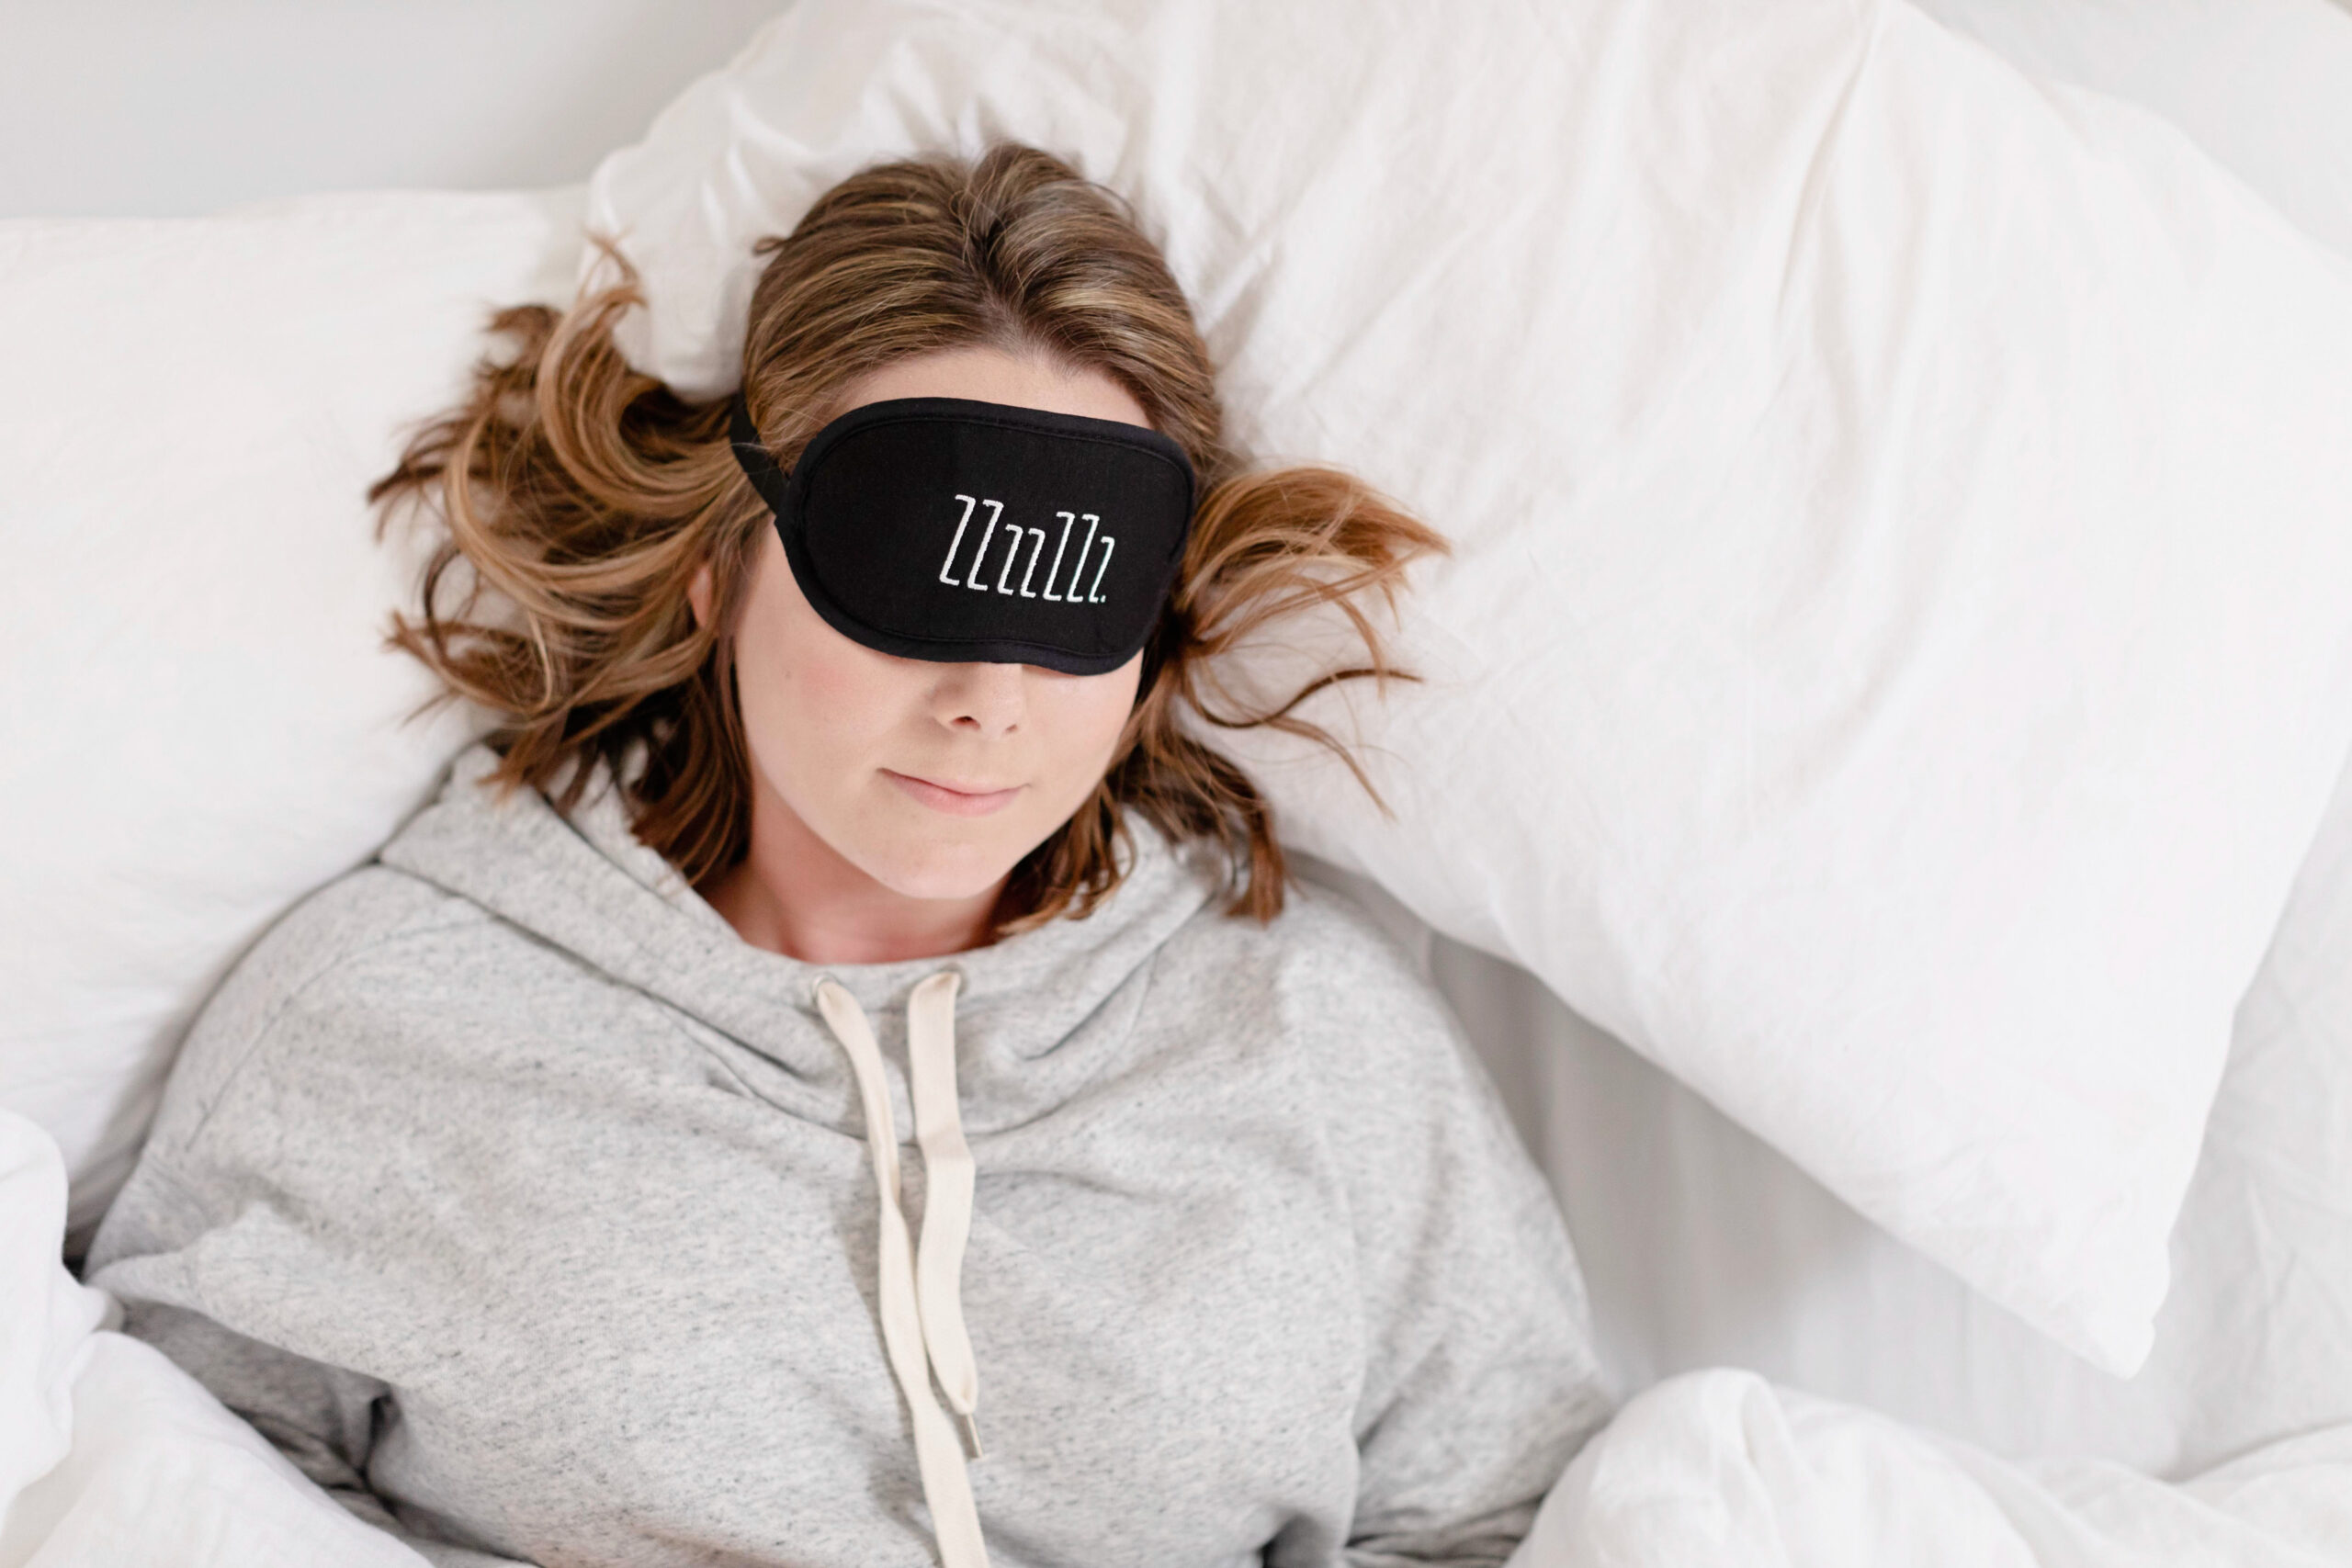 woman wearing gray sweatshirt and black sleep mask with zzzz's laying on white pillow